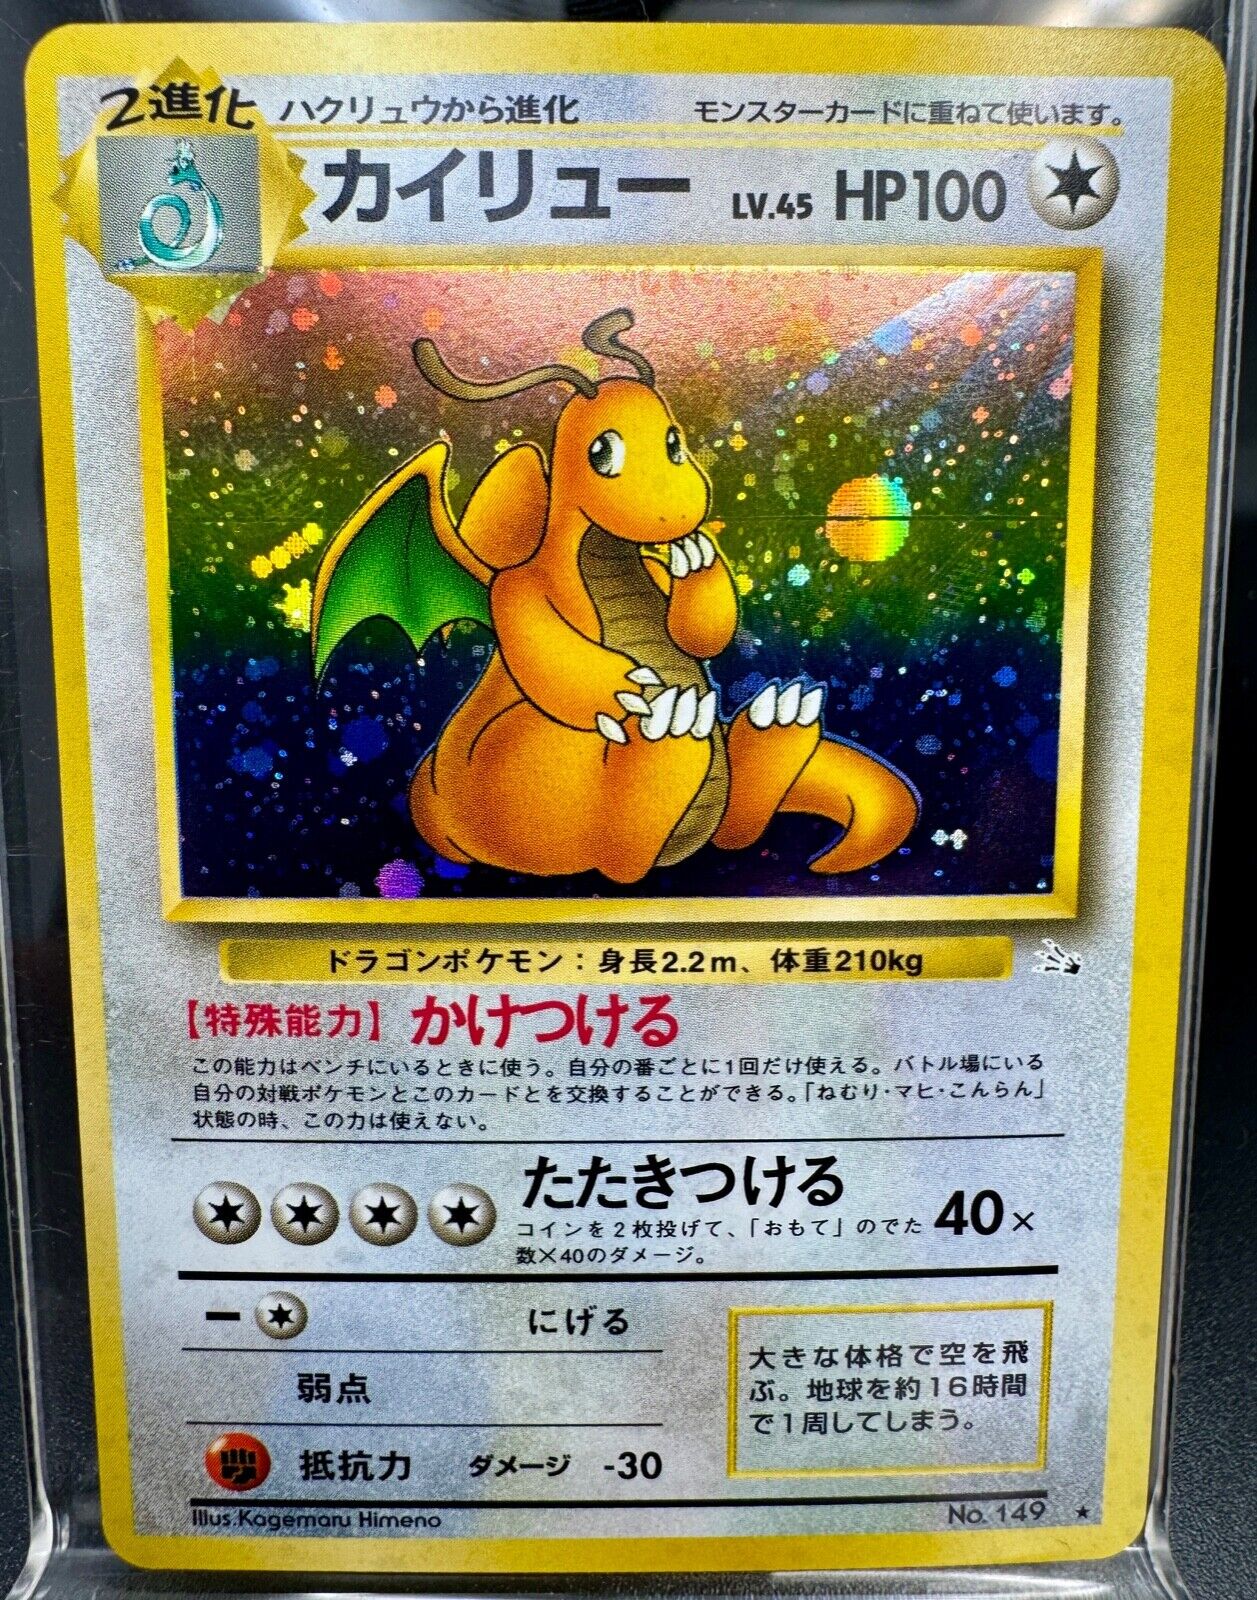 Dragonite No. 149 Holo 1996 Fossil Japanese Pokemon Card Old Back NM/M US SELLER